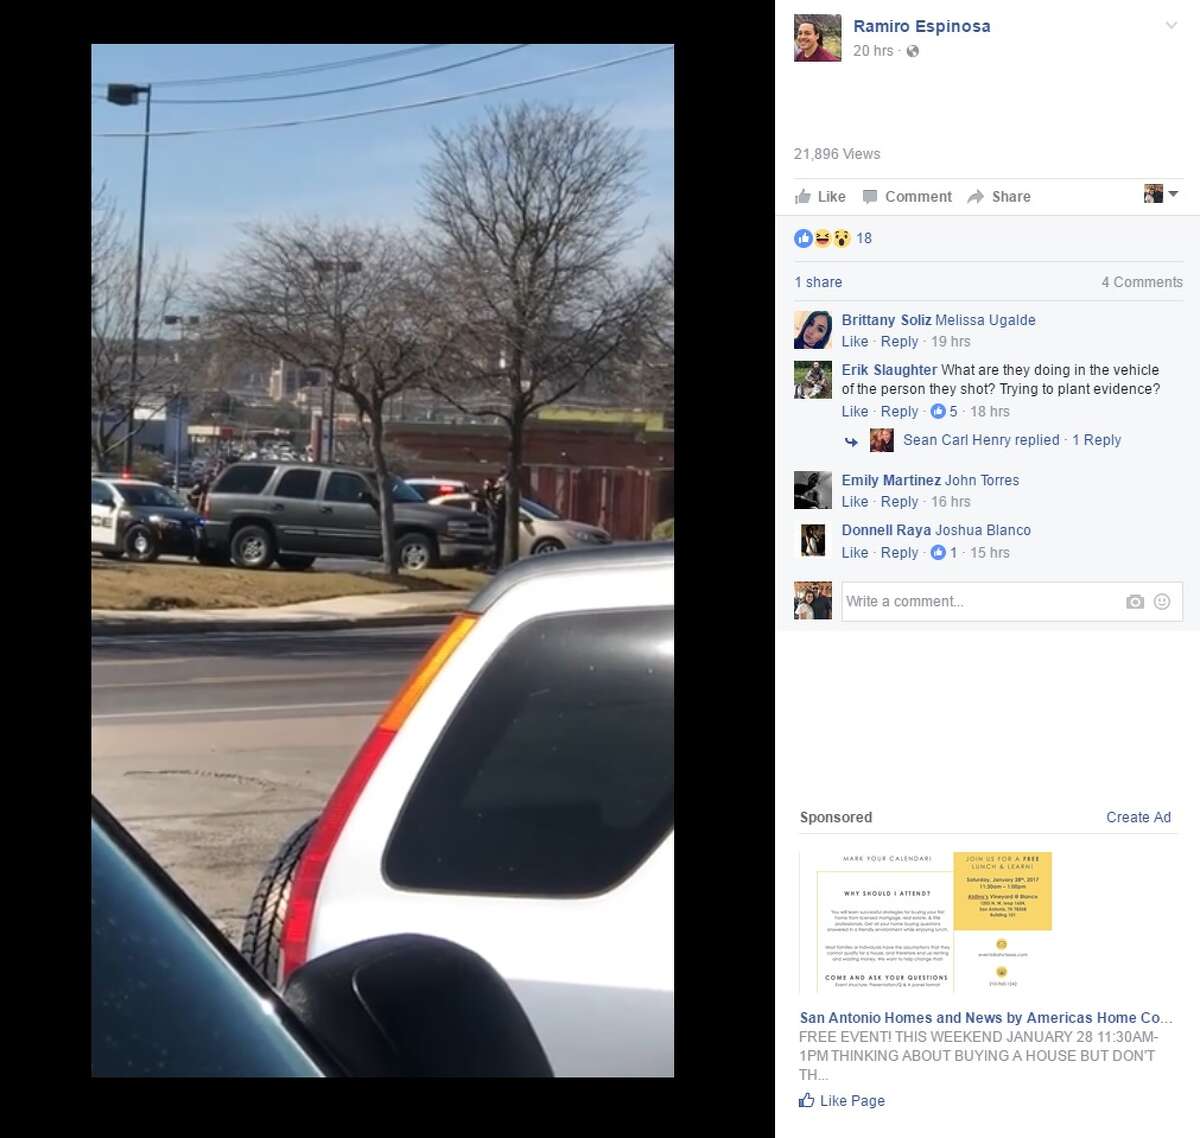 An intense standoff between police and an armed man took place a parking lot near Logan's Roadhouse in San Marcos on Jan. 24 2017. Police were called to the vehicle he was in and after trying to speak with the man, he took his own life using a handgun. Bystanders captured video of the incident and uploaded it to Facebook.